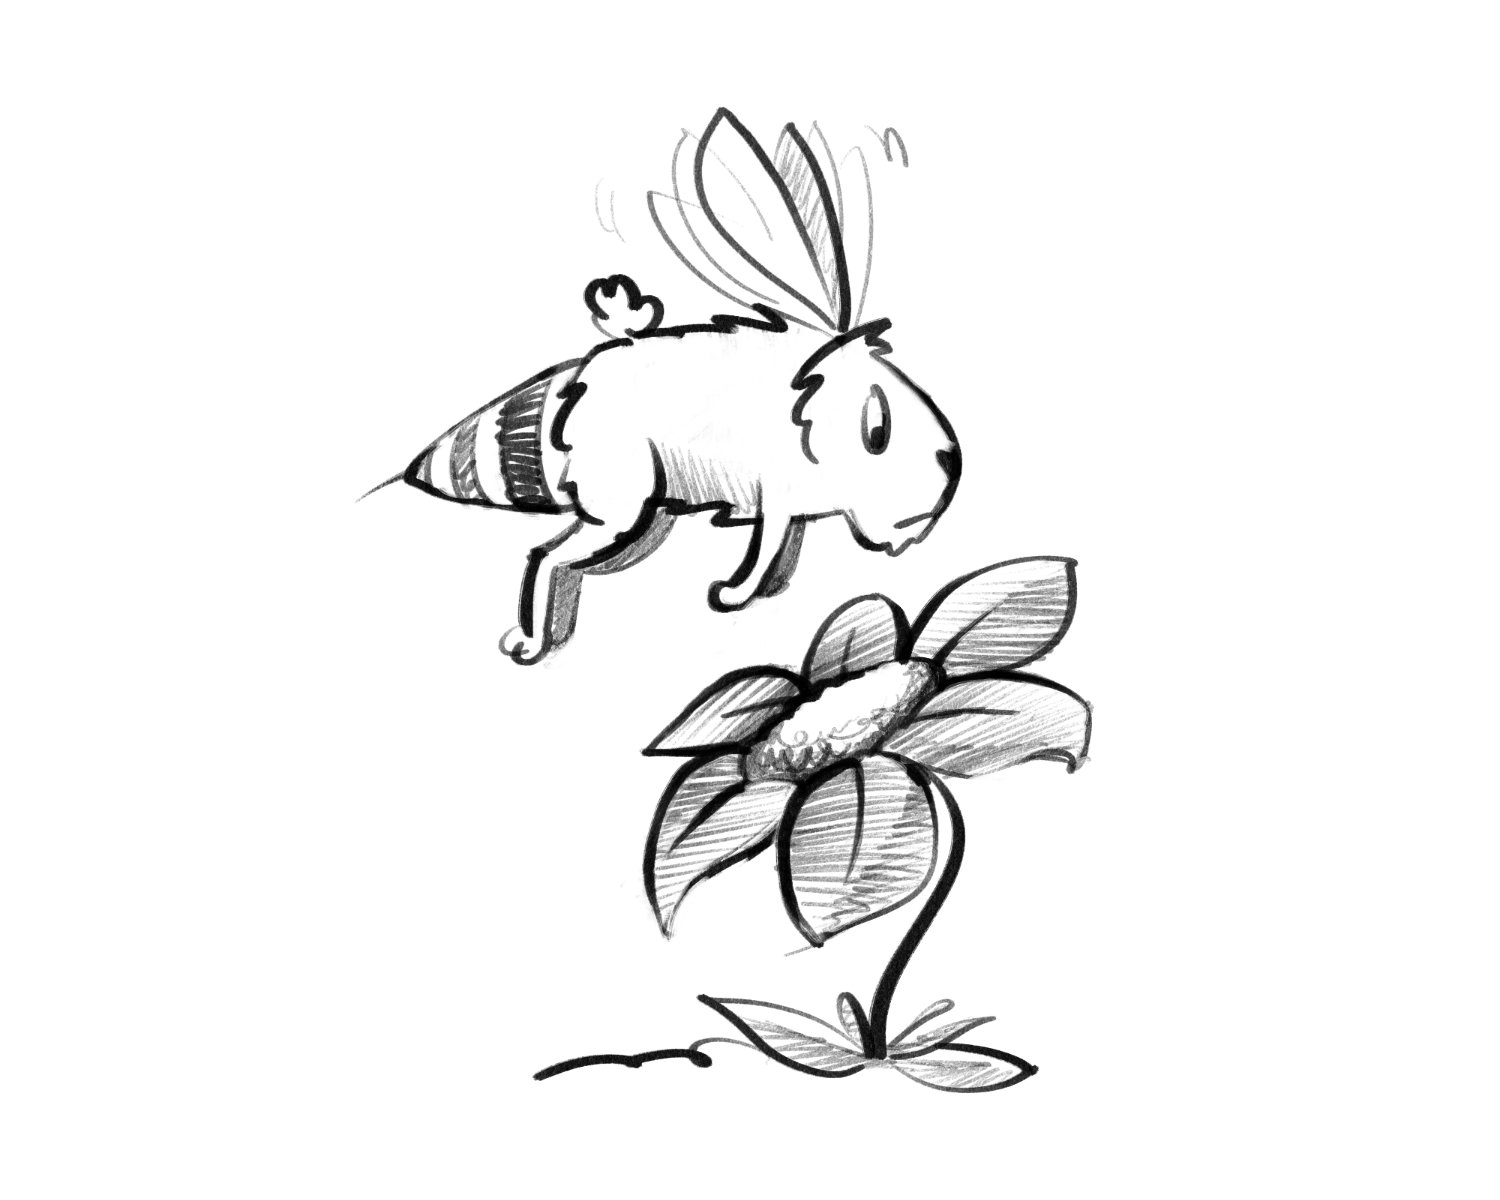 Of Bunnblebees, Snakes, & potted sharks